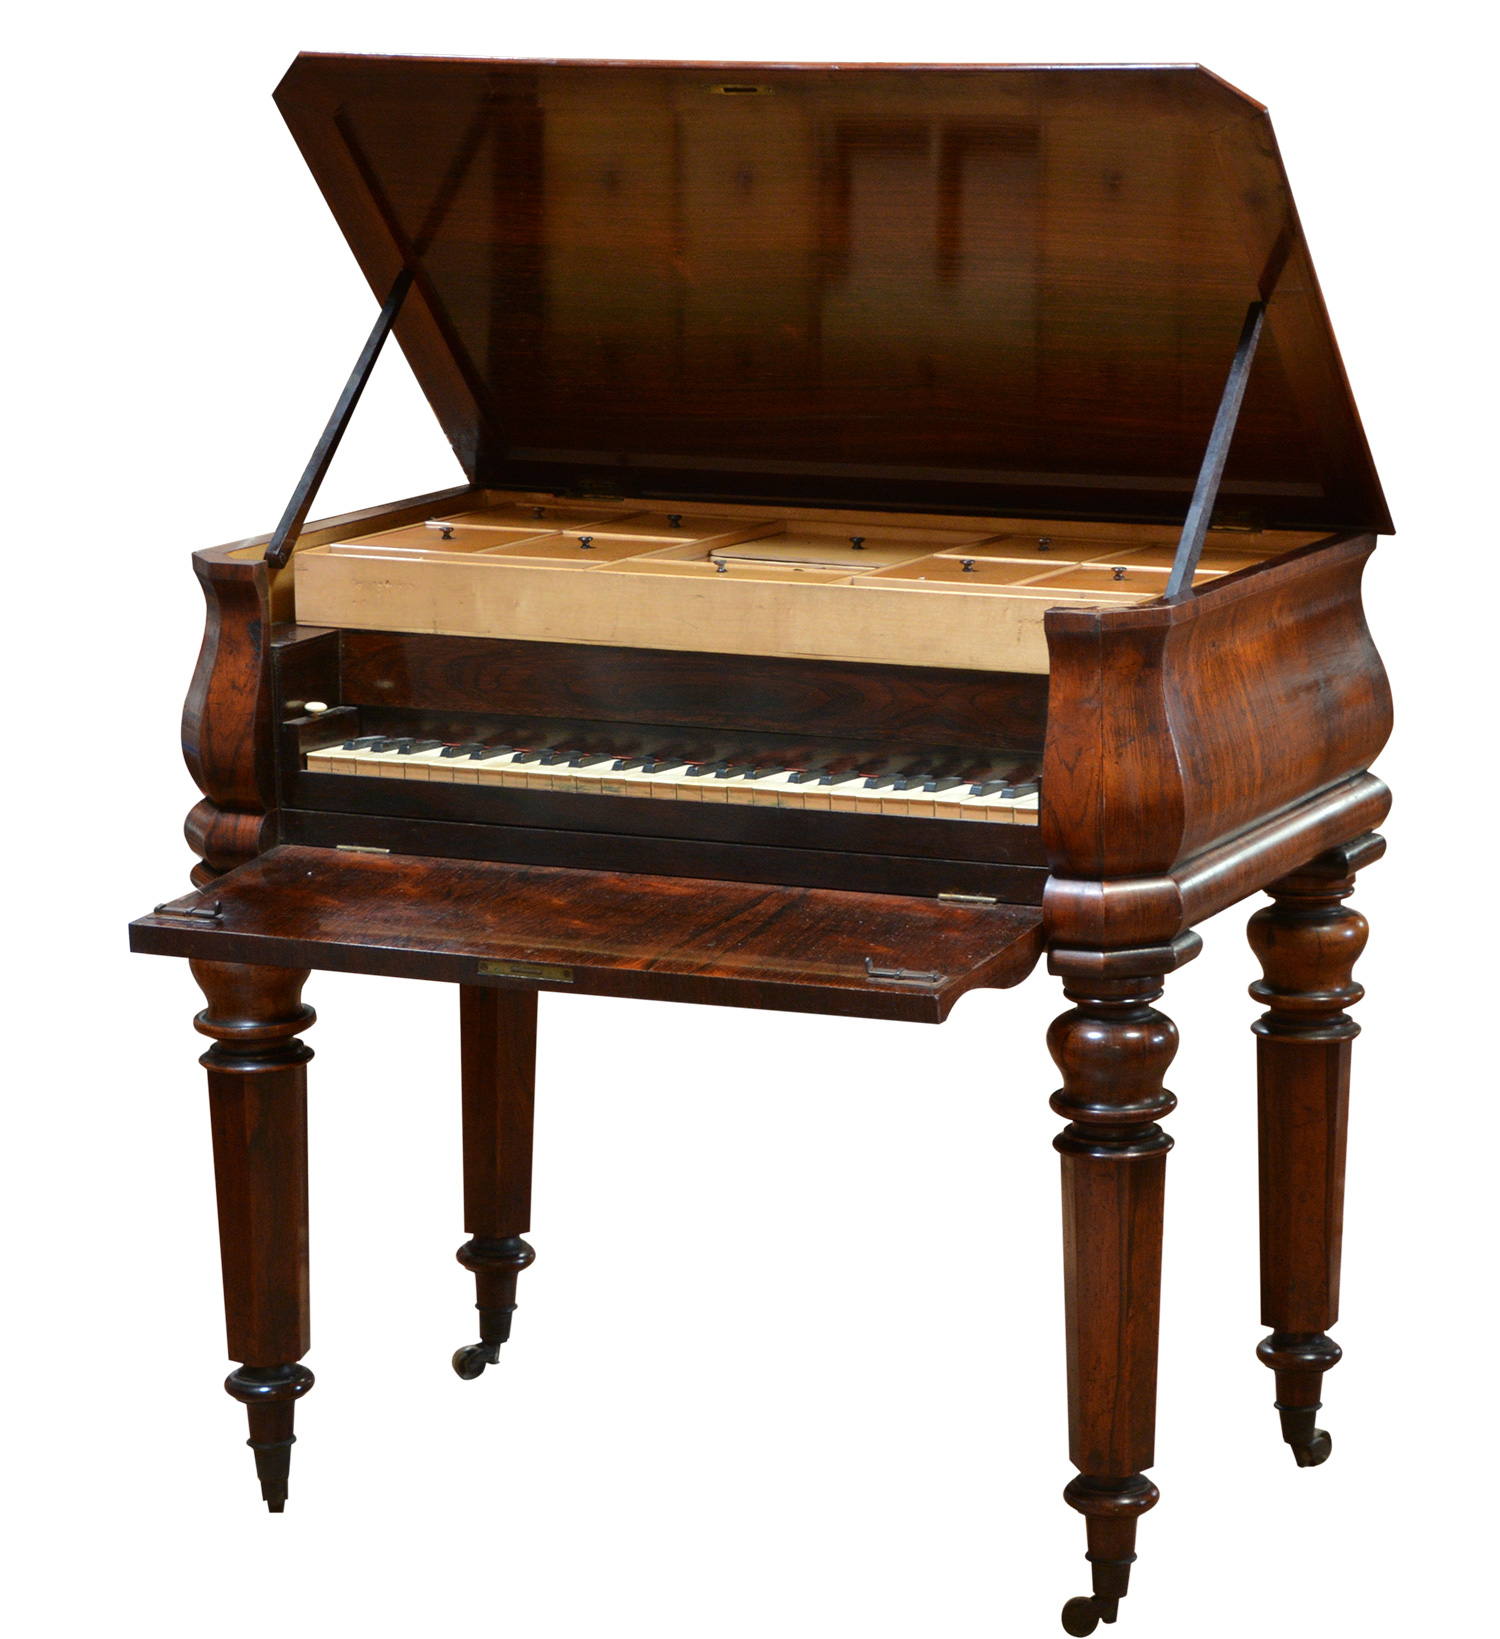 Sewing Table Piano, Anonymous, ca. 1840 - Period Piano Company